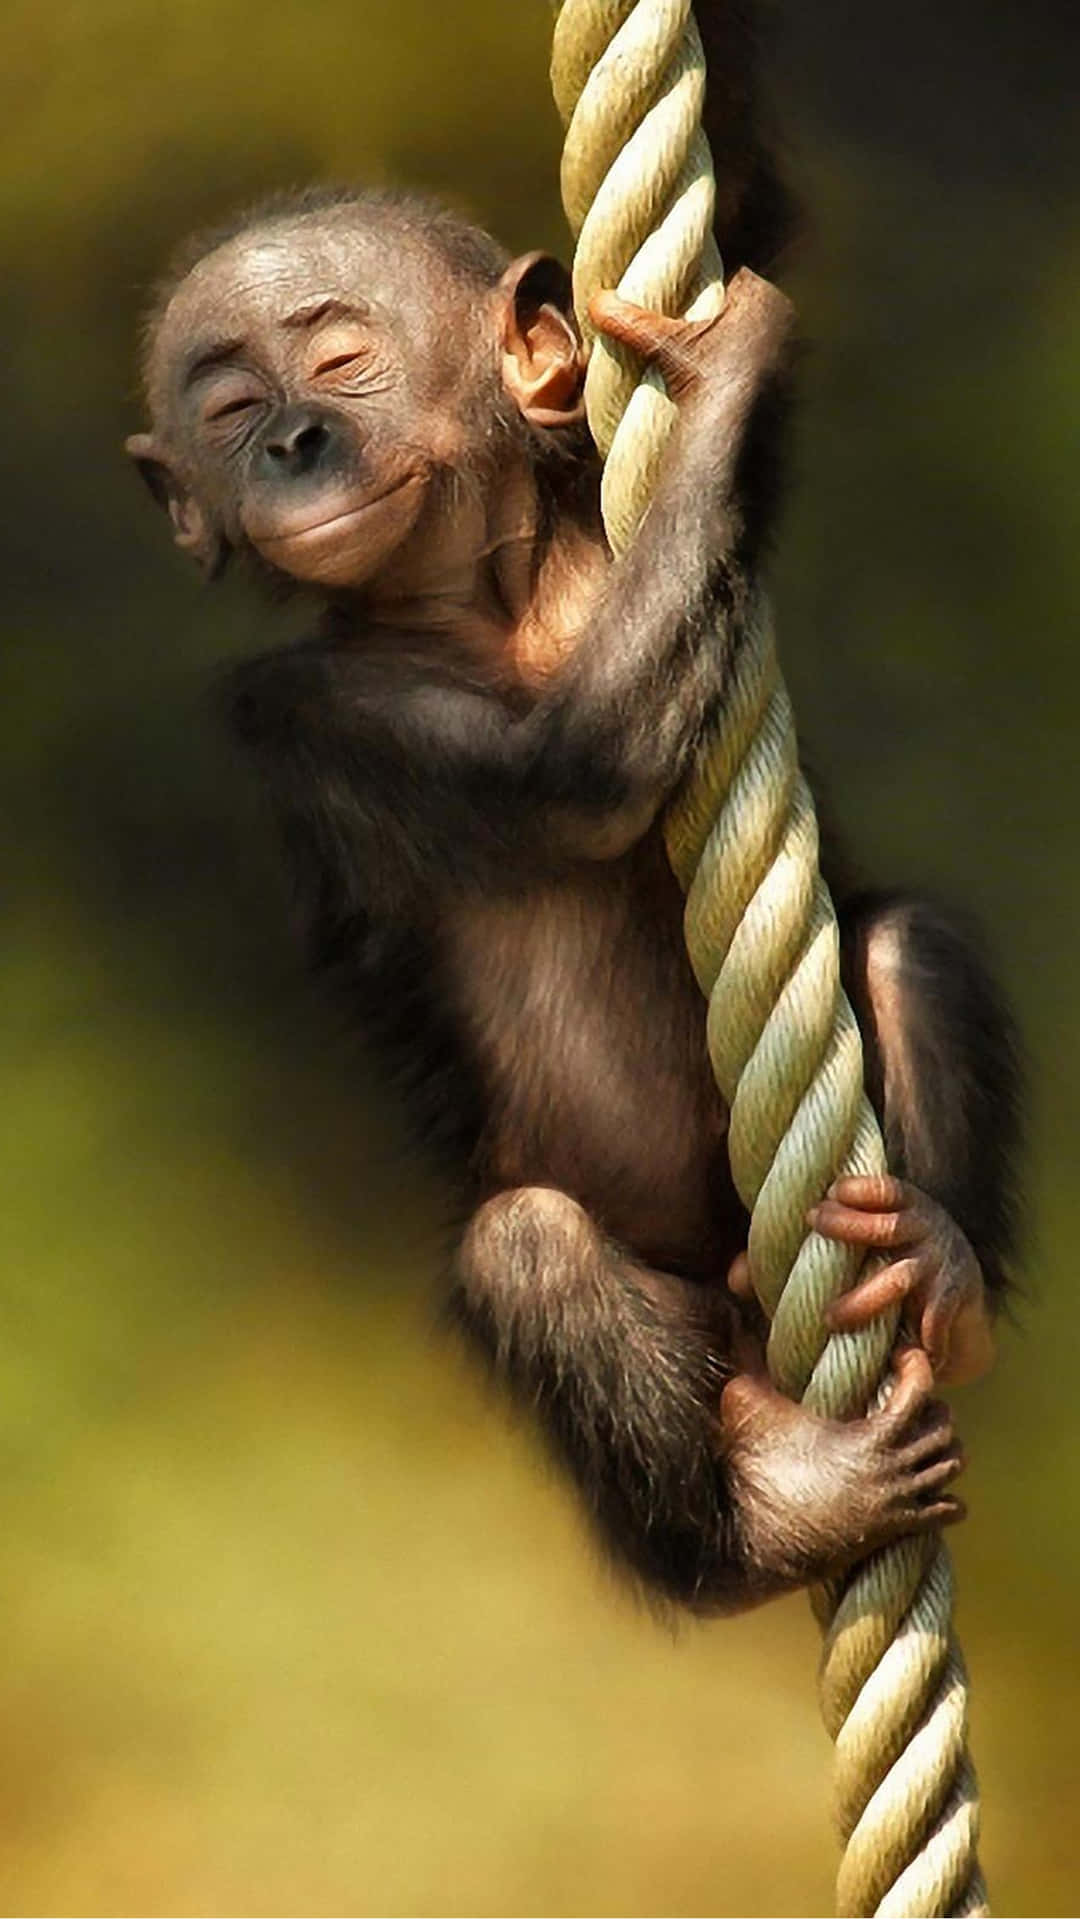 Add a touch of fun to your iPhone with the Monkey iPhone wallpaper set. Wallpaper